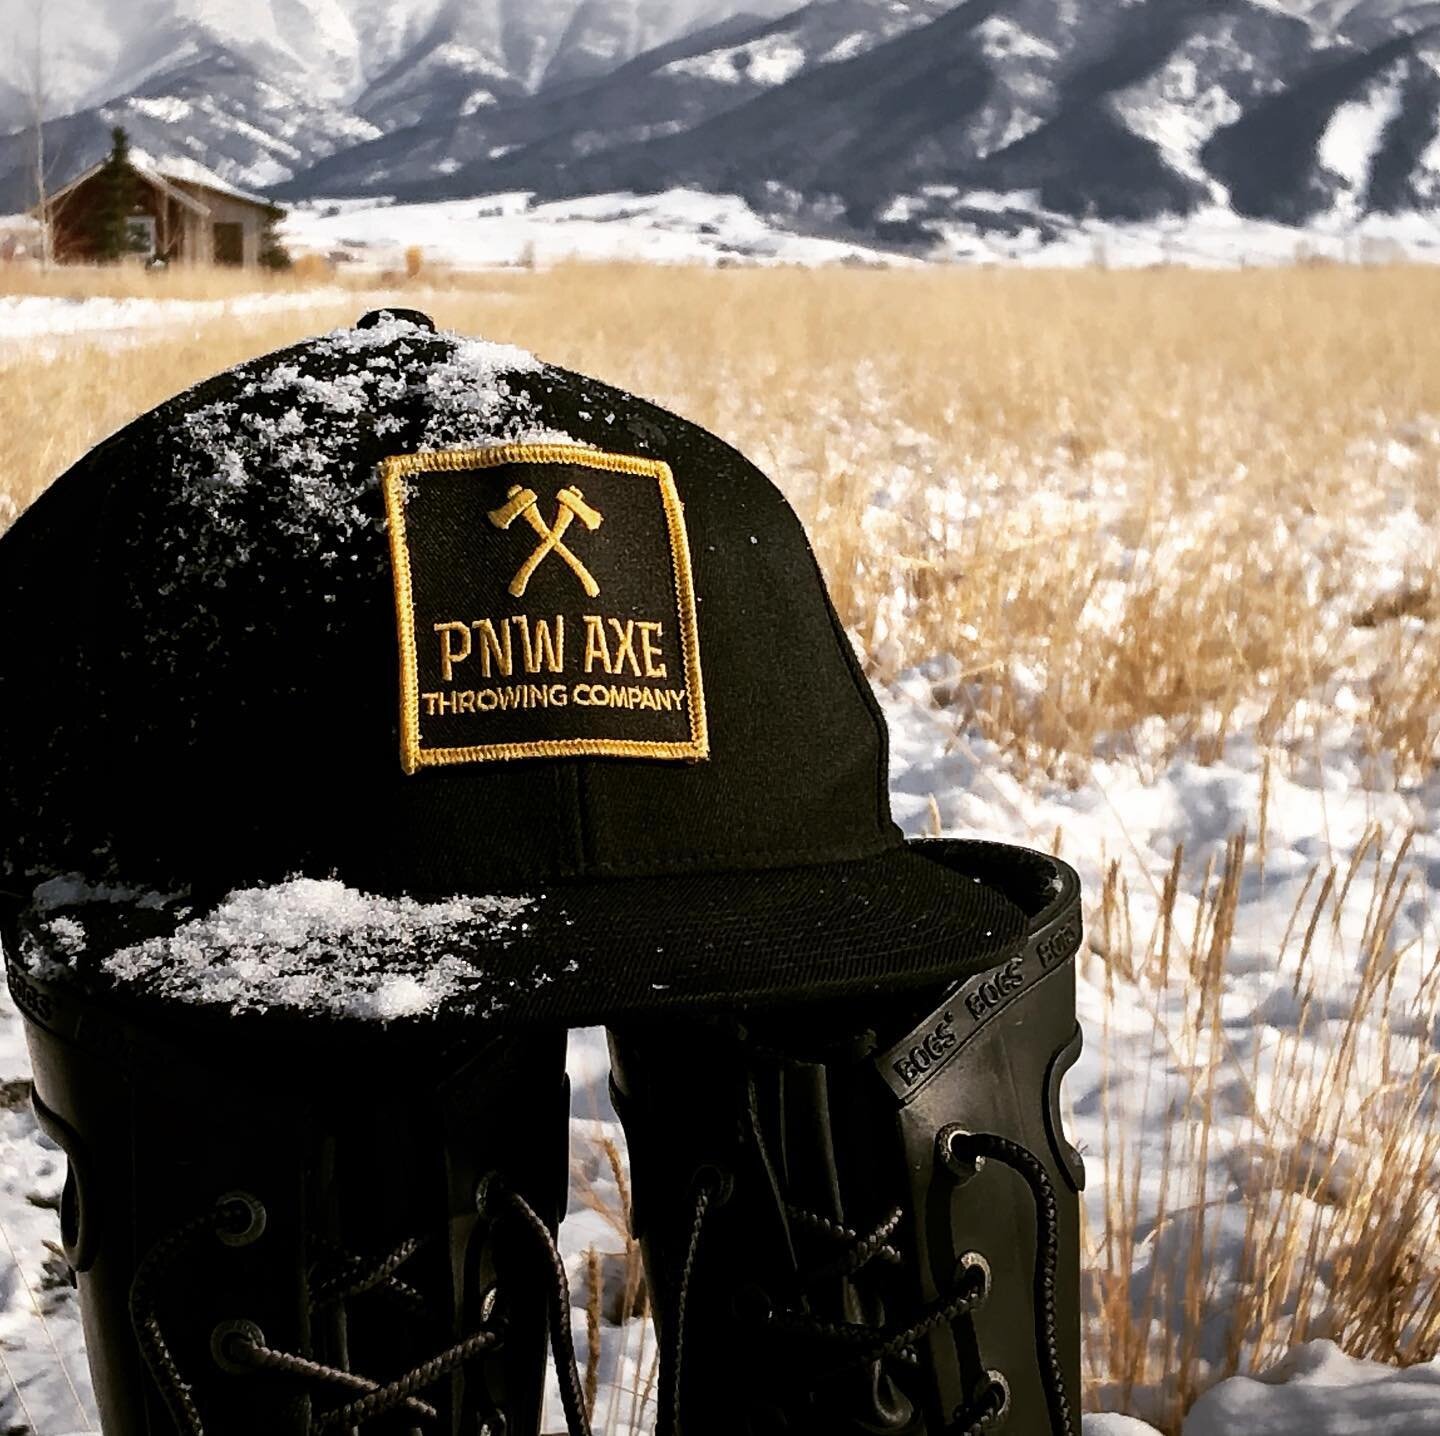 PNW AXE Throwing Company has enjoyed a quiet January after an exciting 2019. Starting to book dates in 2020. Look forward to being a part of your next event. Email us at events@pnwaxe.com #mobileaxethrowing #pnw #seattleevents #pnwaxe #winterbreak #a